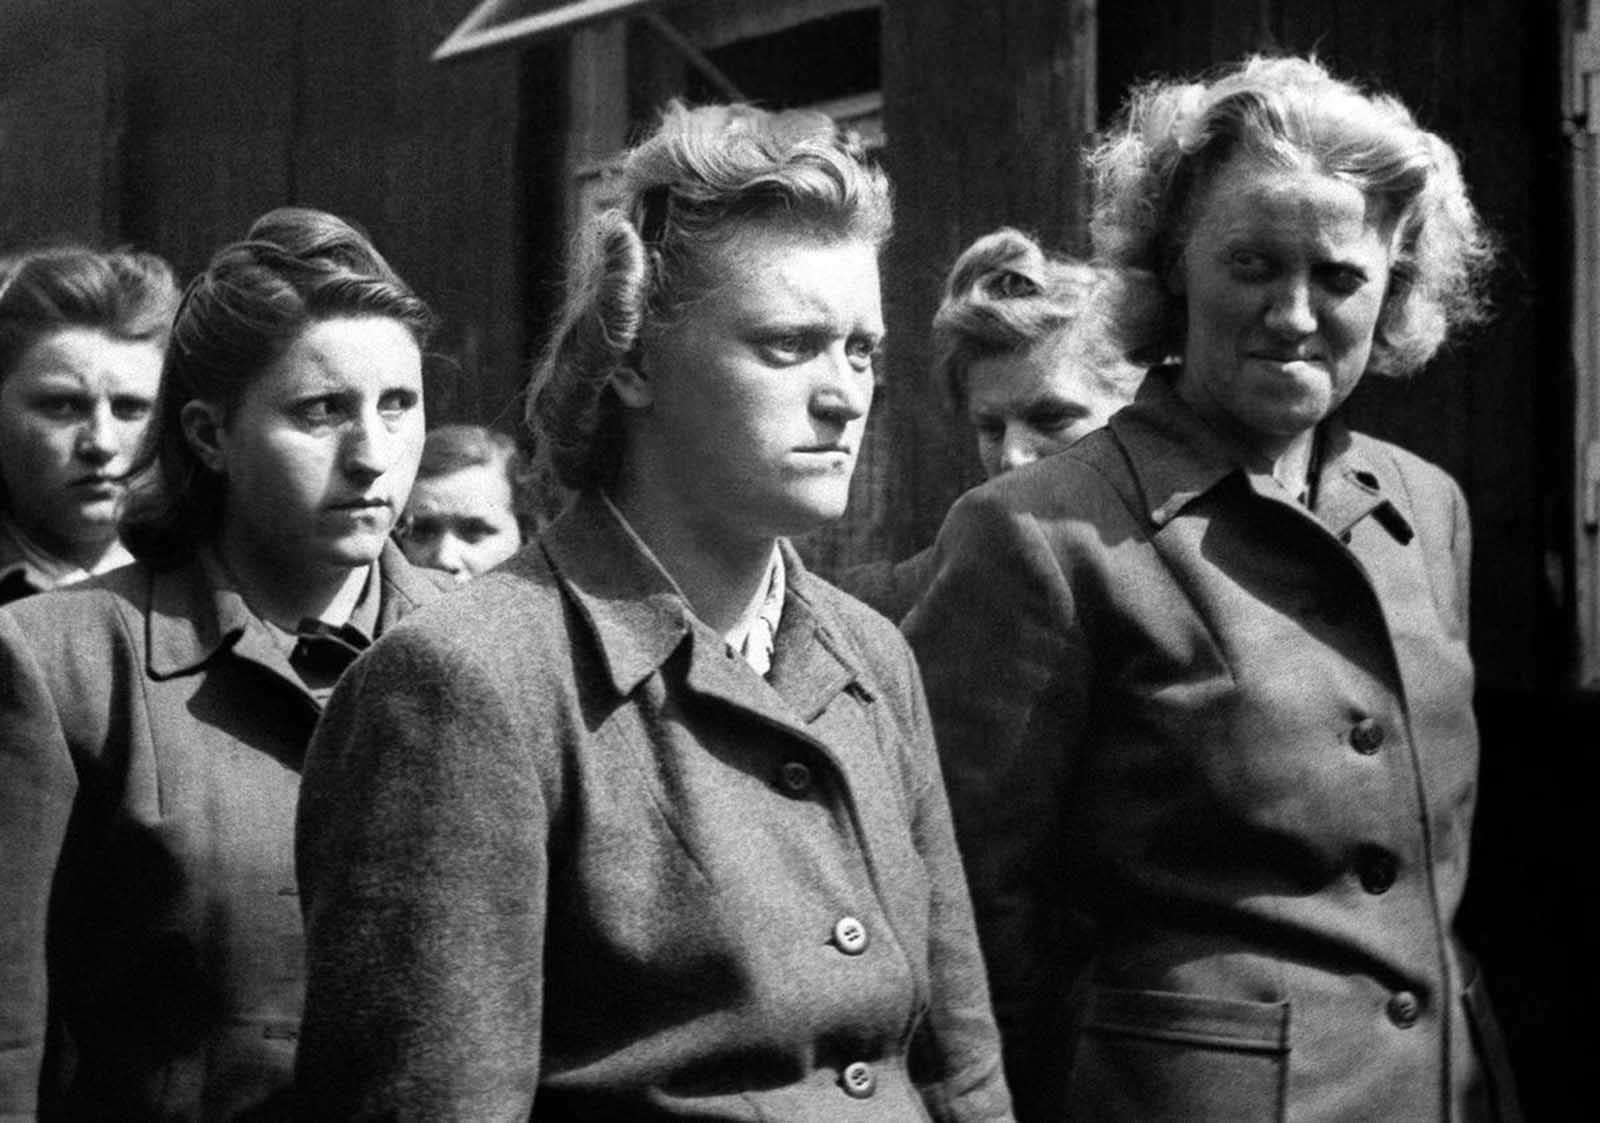 Some of the S.S. women whose brutality was equal to that of their male counterparts at the Bergen-Belsen concentration camp in Bergen, Germany, on April 21, 1945.